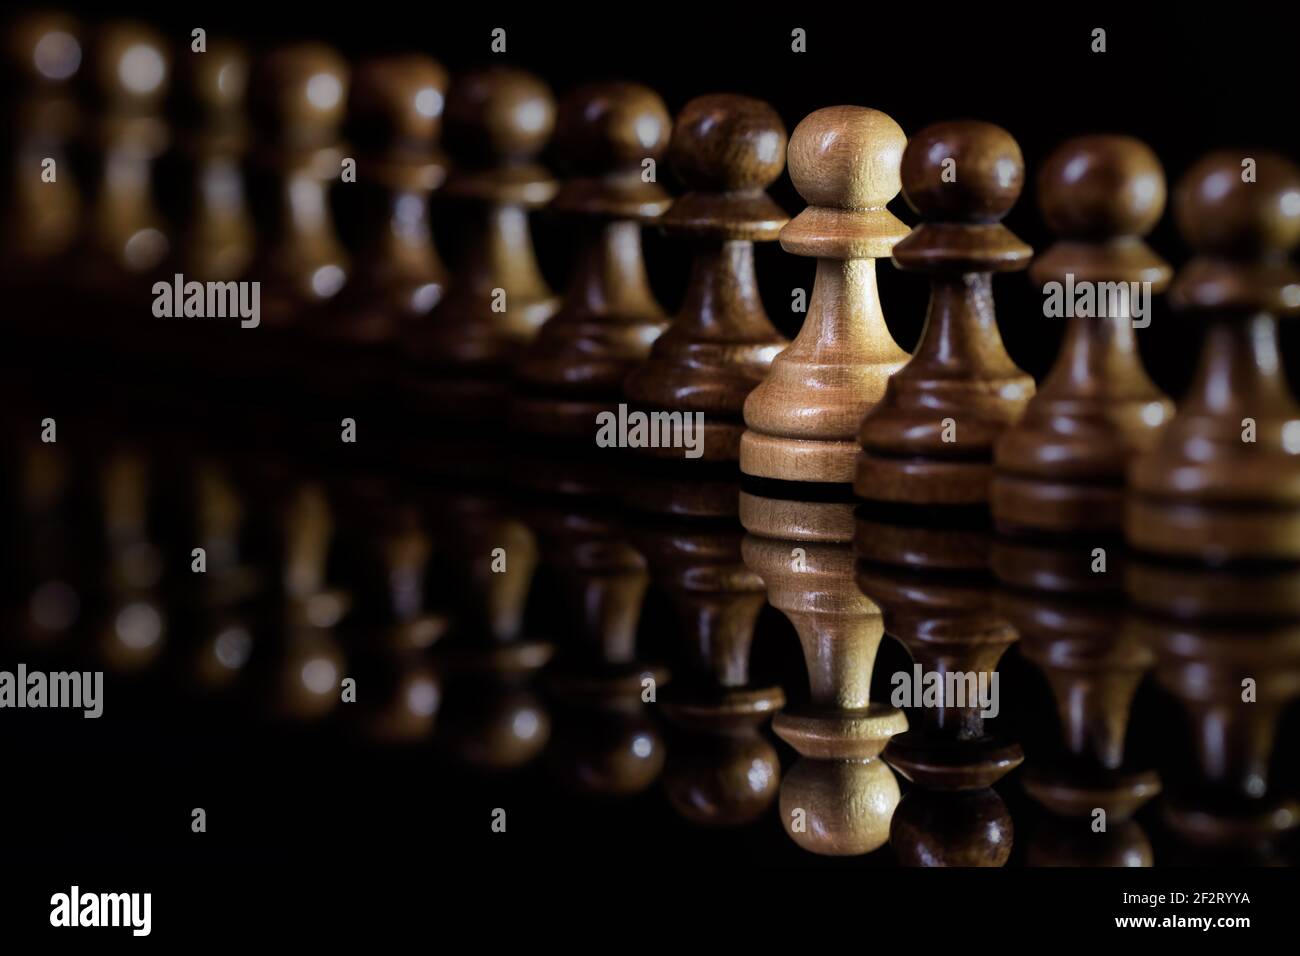 One different pawn chess piece in a row. Unique identity and individuality concept. Black background Stock Photo